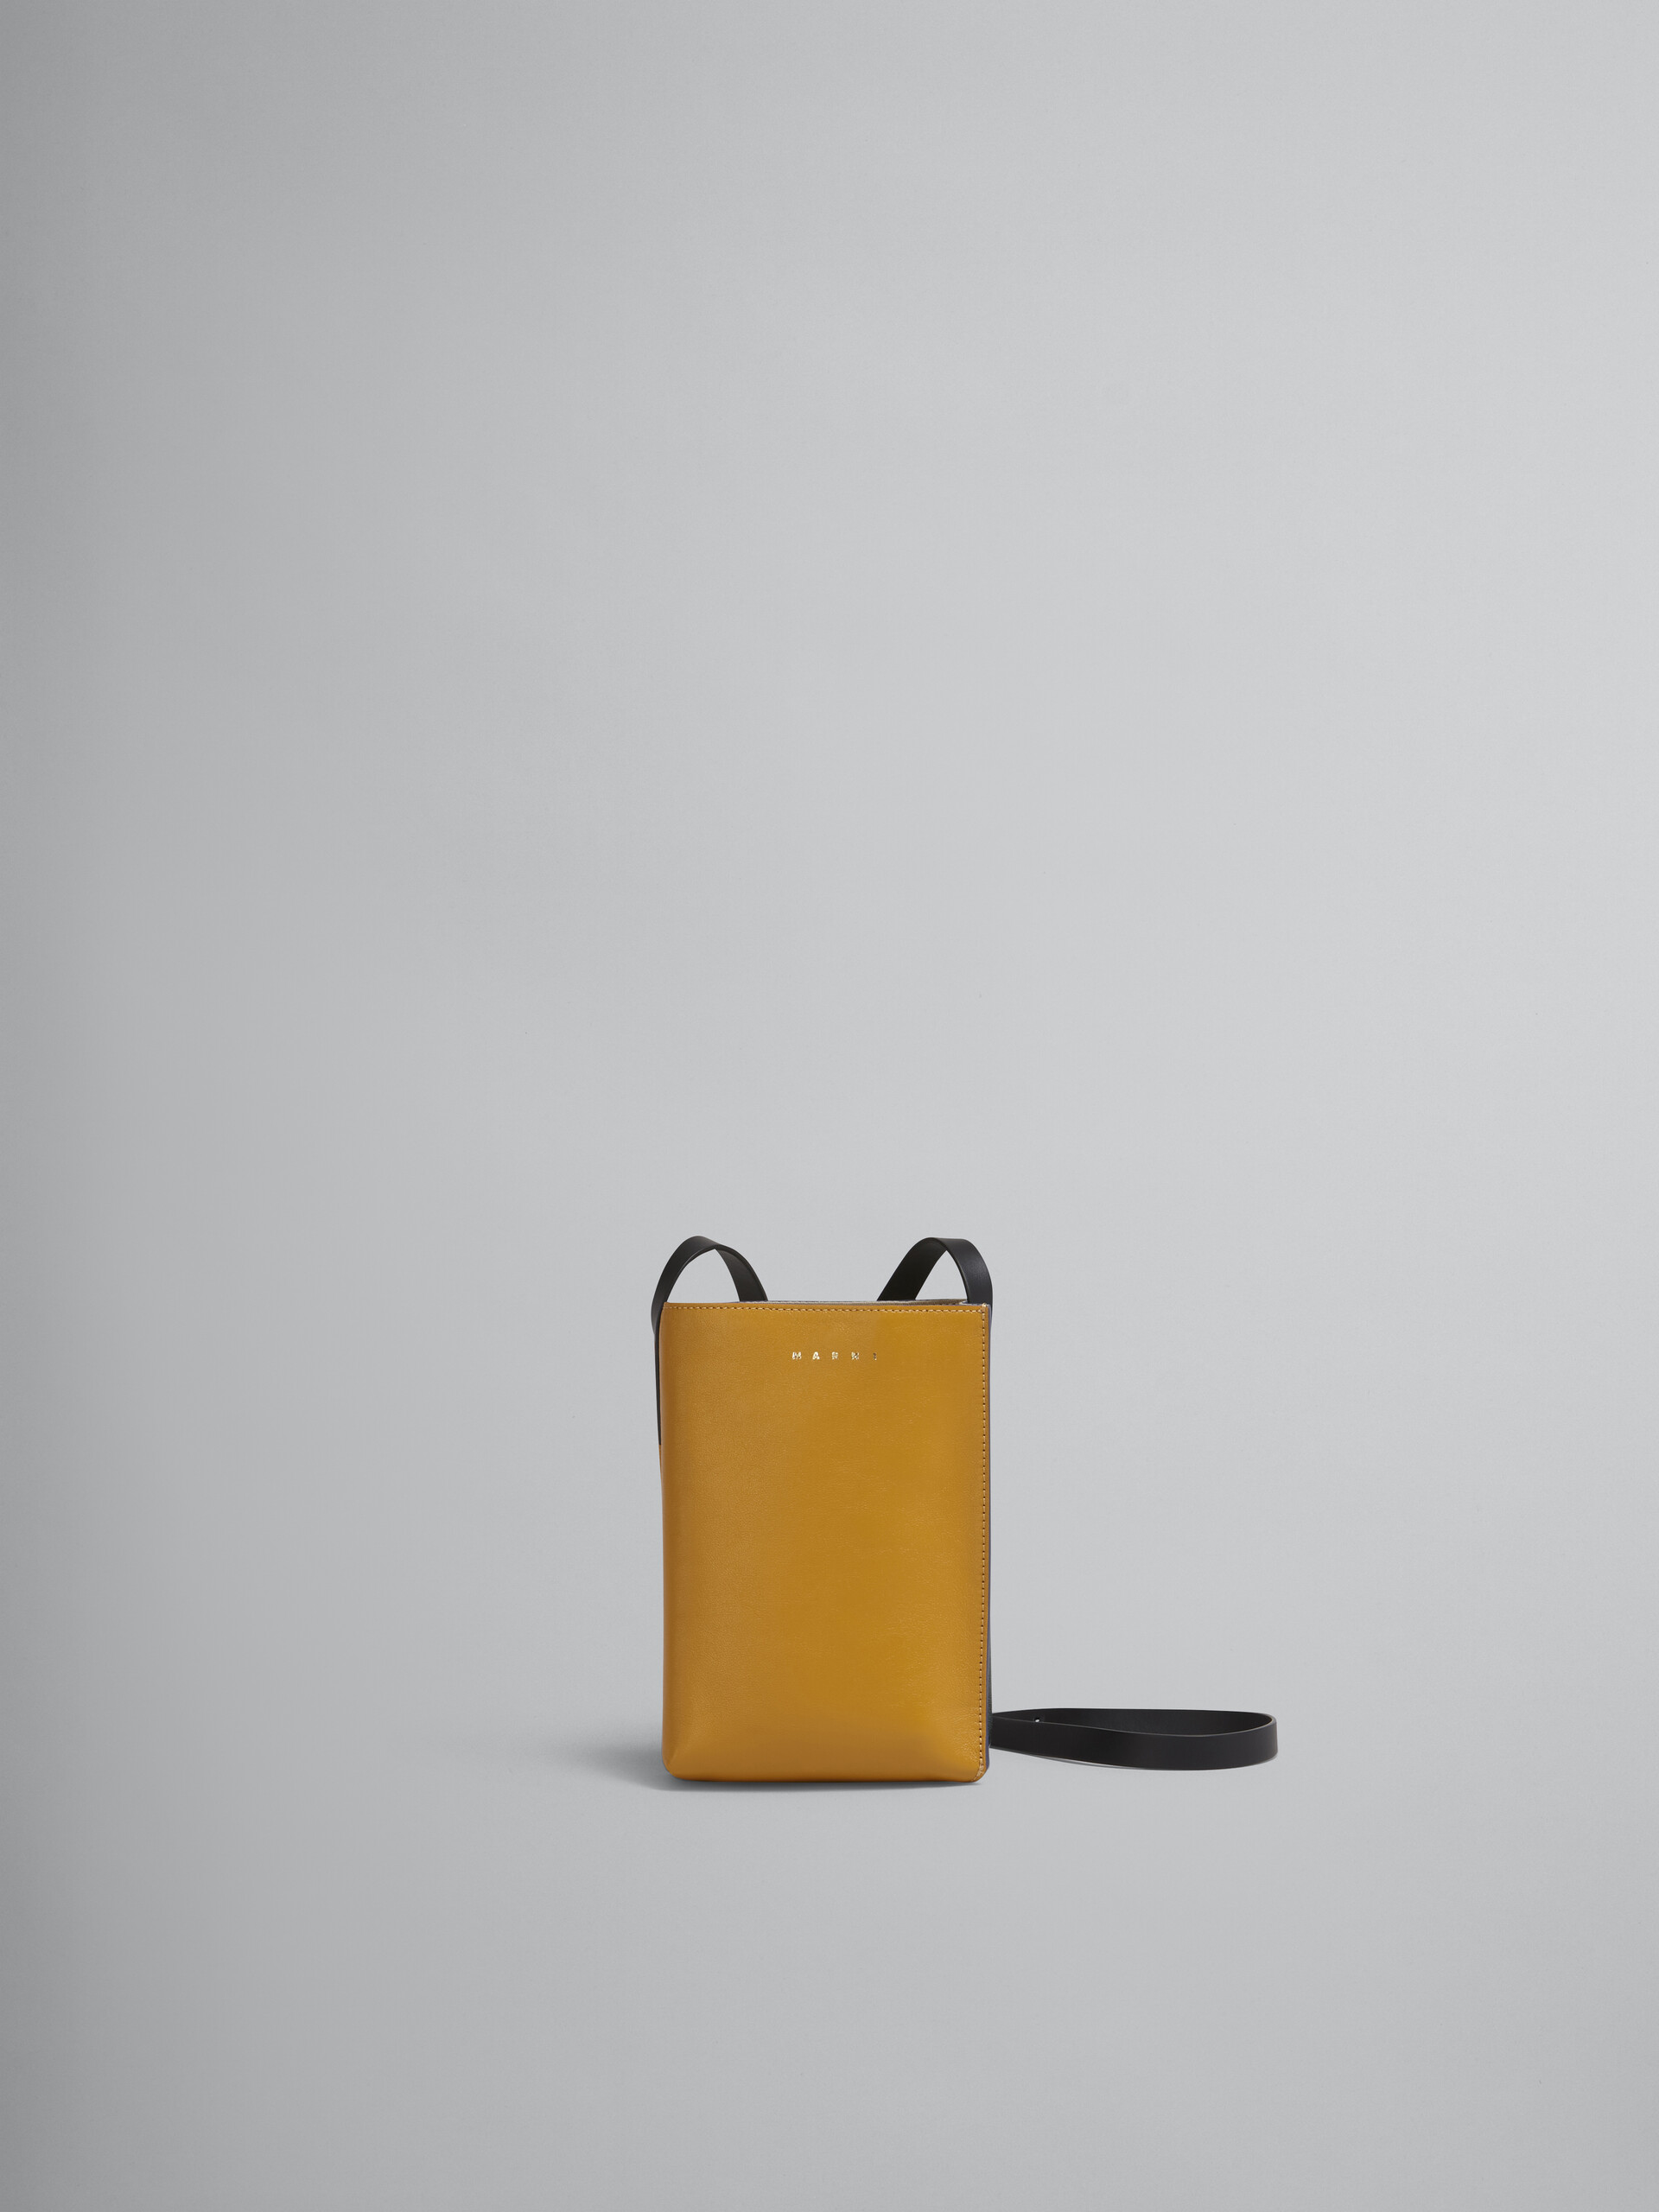 MUSEO SOFT nano bag in yellow and green leather - Shoulder Bags - Image 1